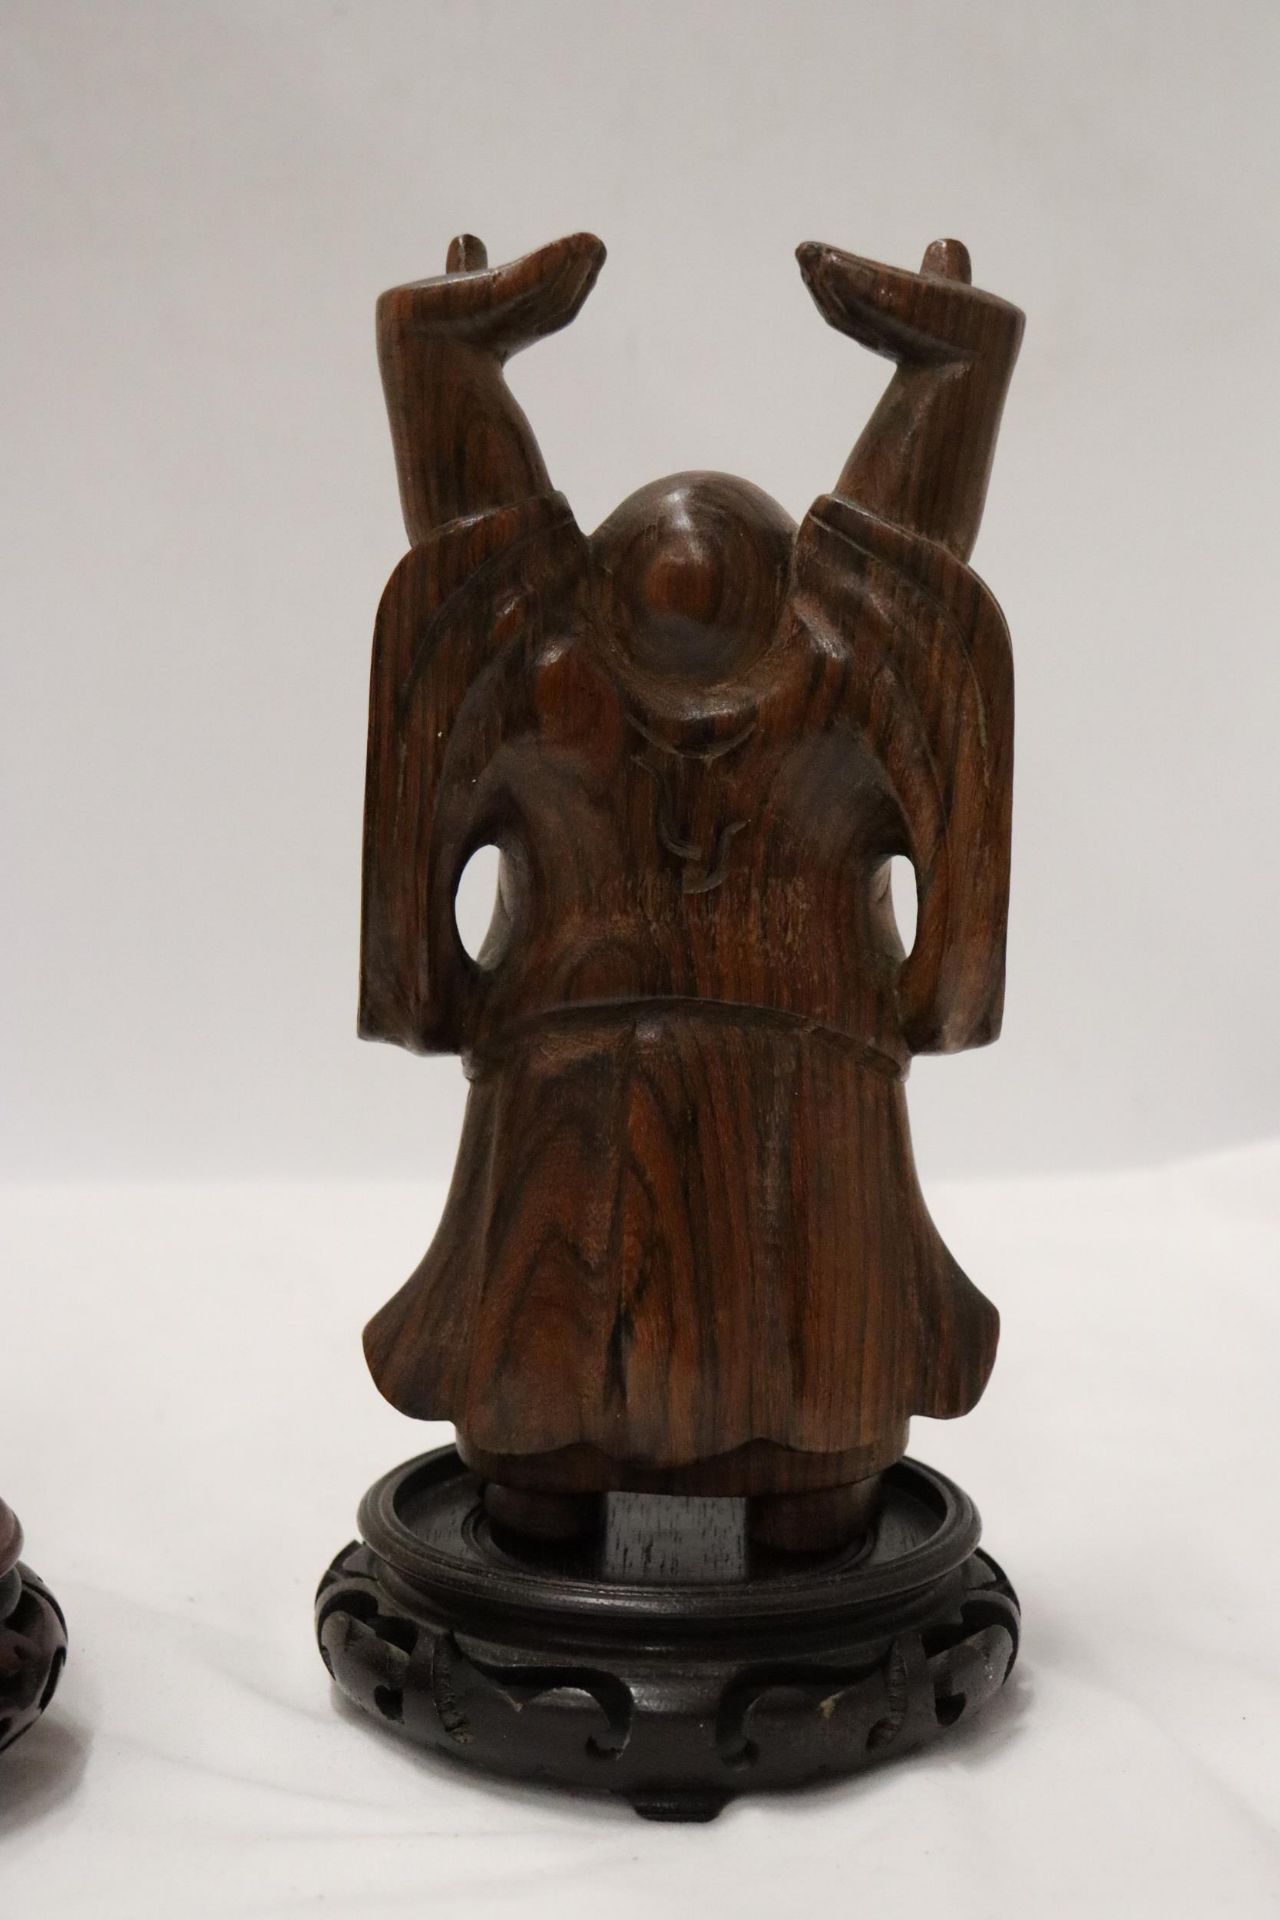 TWO CARVED WOODEN ORIENTAL FIGURES TO INCLUDE A LAUGHING BUDDAH, ON STANDS - Image 5 of 9